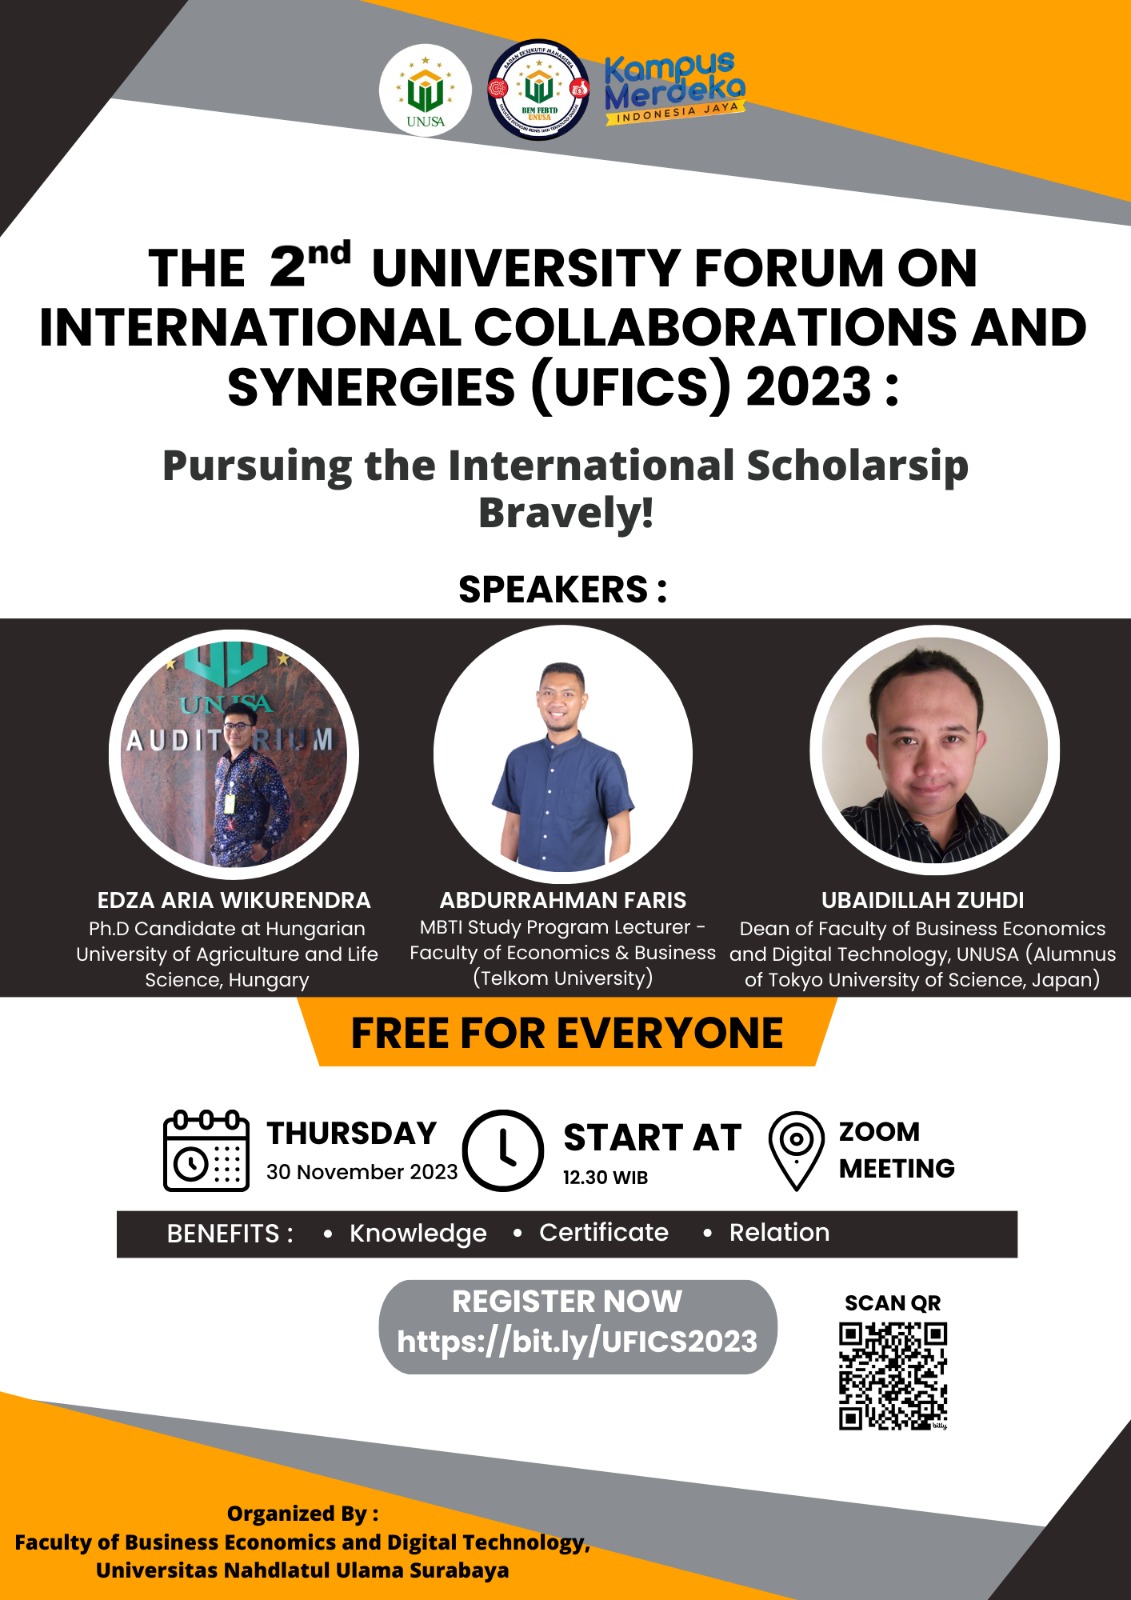 The 2nd University Forum on International Collaborations and Synergies (UFICS) 2023 : Pursuing the International Scholarship Bravely!